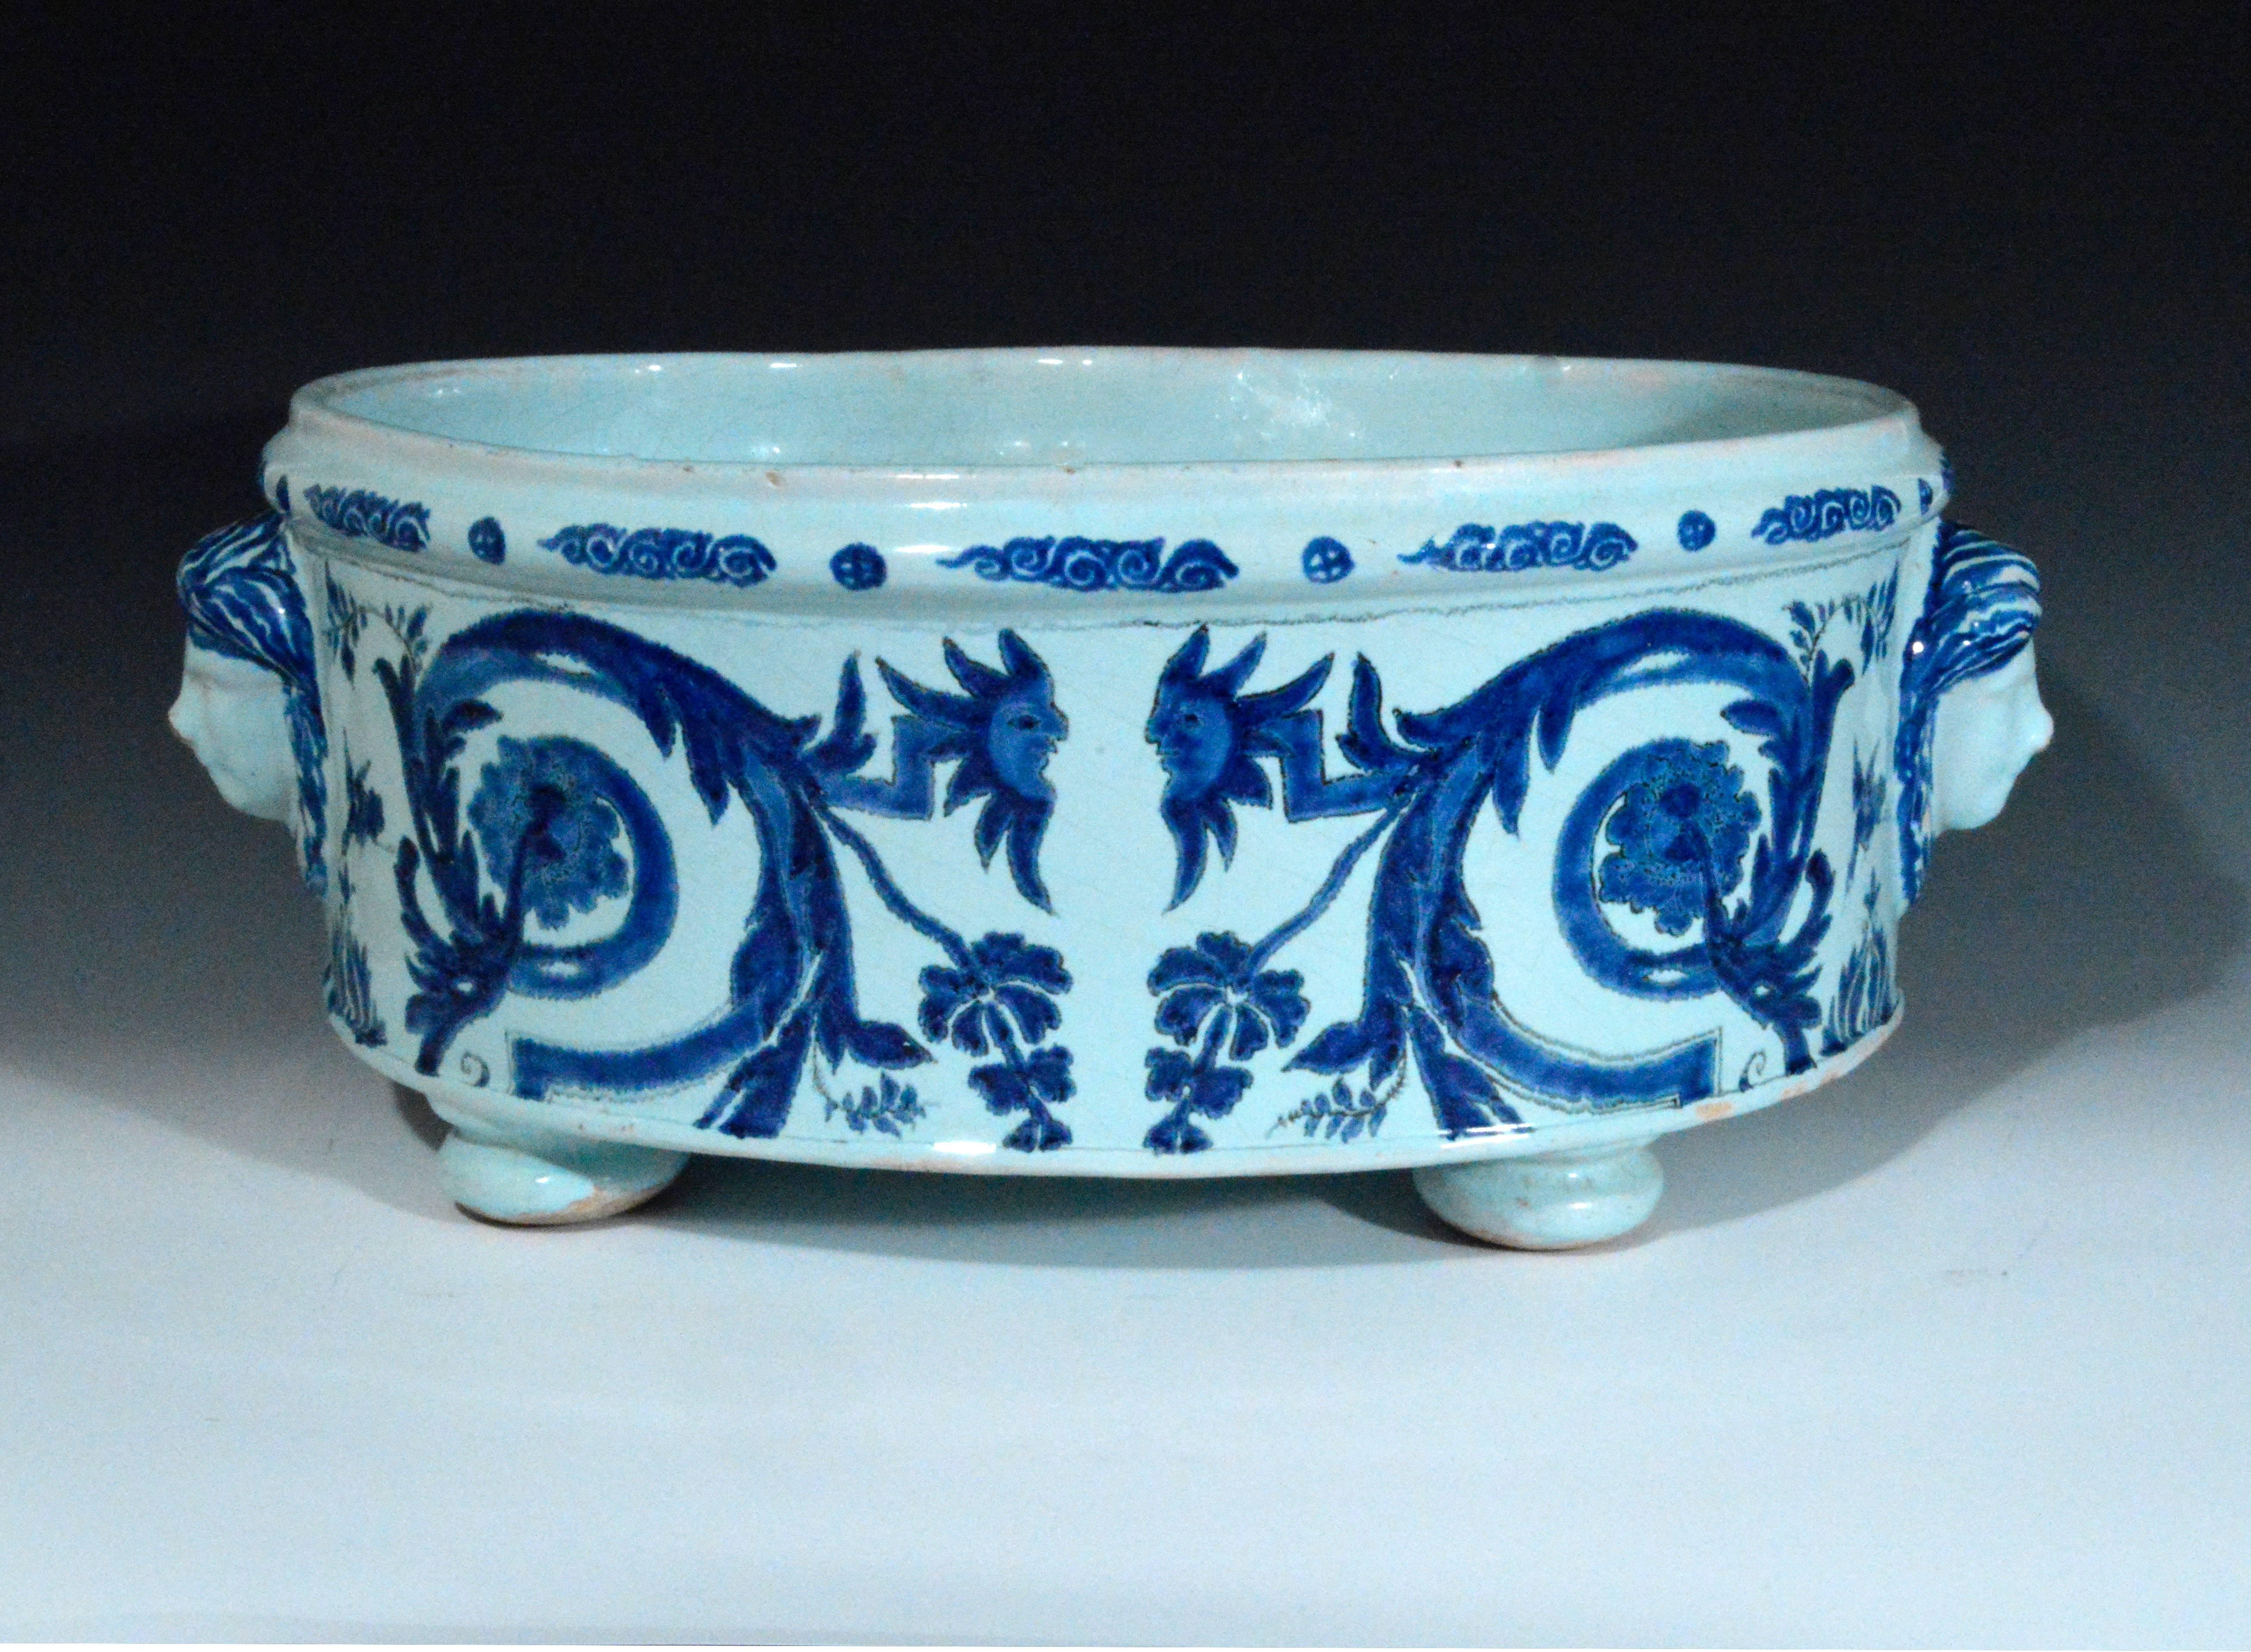 The Lille faience or tin-glazed earthenware under-glaze blue and white heart-shaped basin is supported on three bun feet. The exterior is painted with stylized floral scrolls terminating in sunflower-like flowerheads looking like masks. To each side